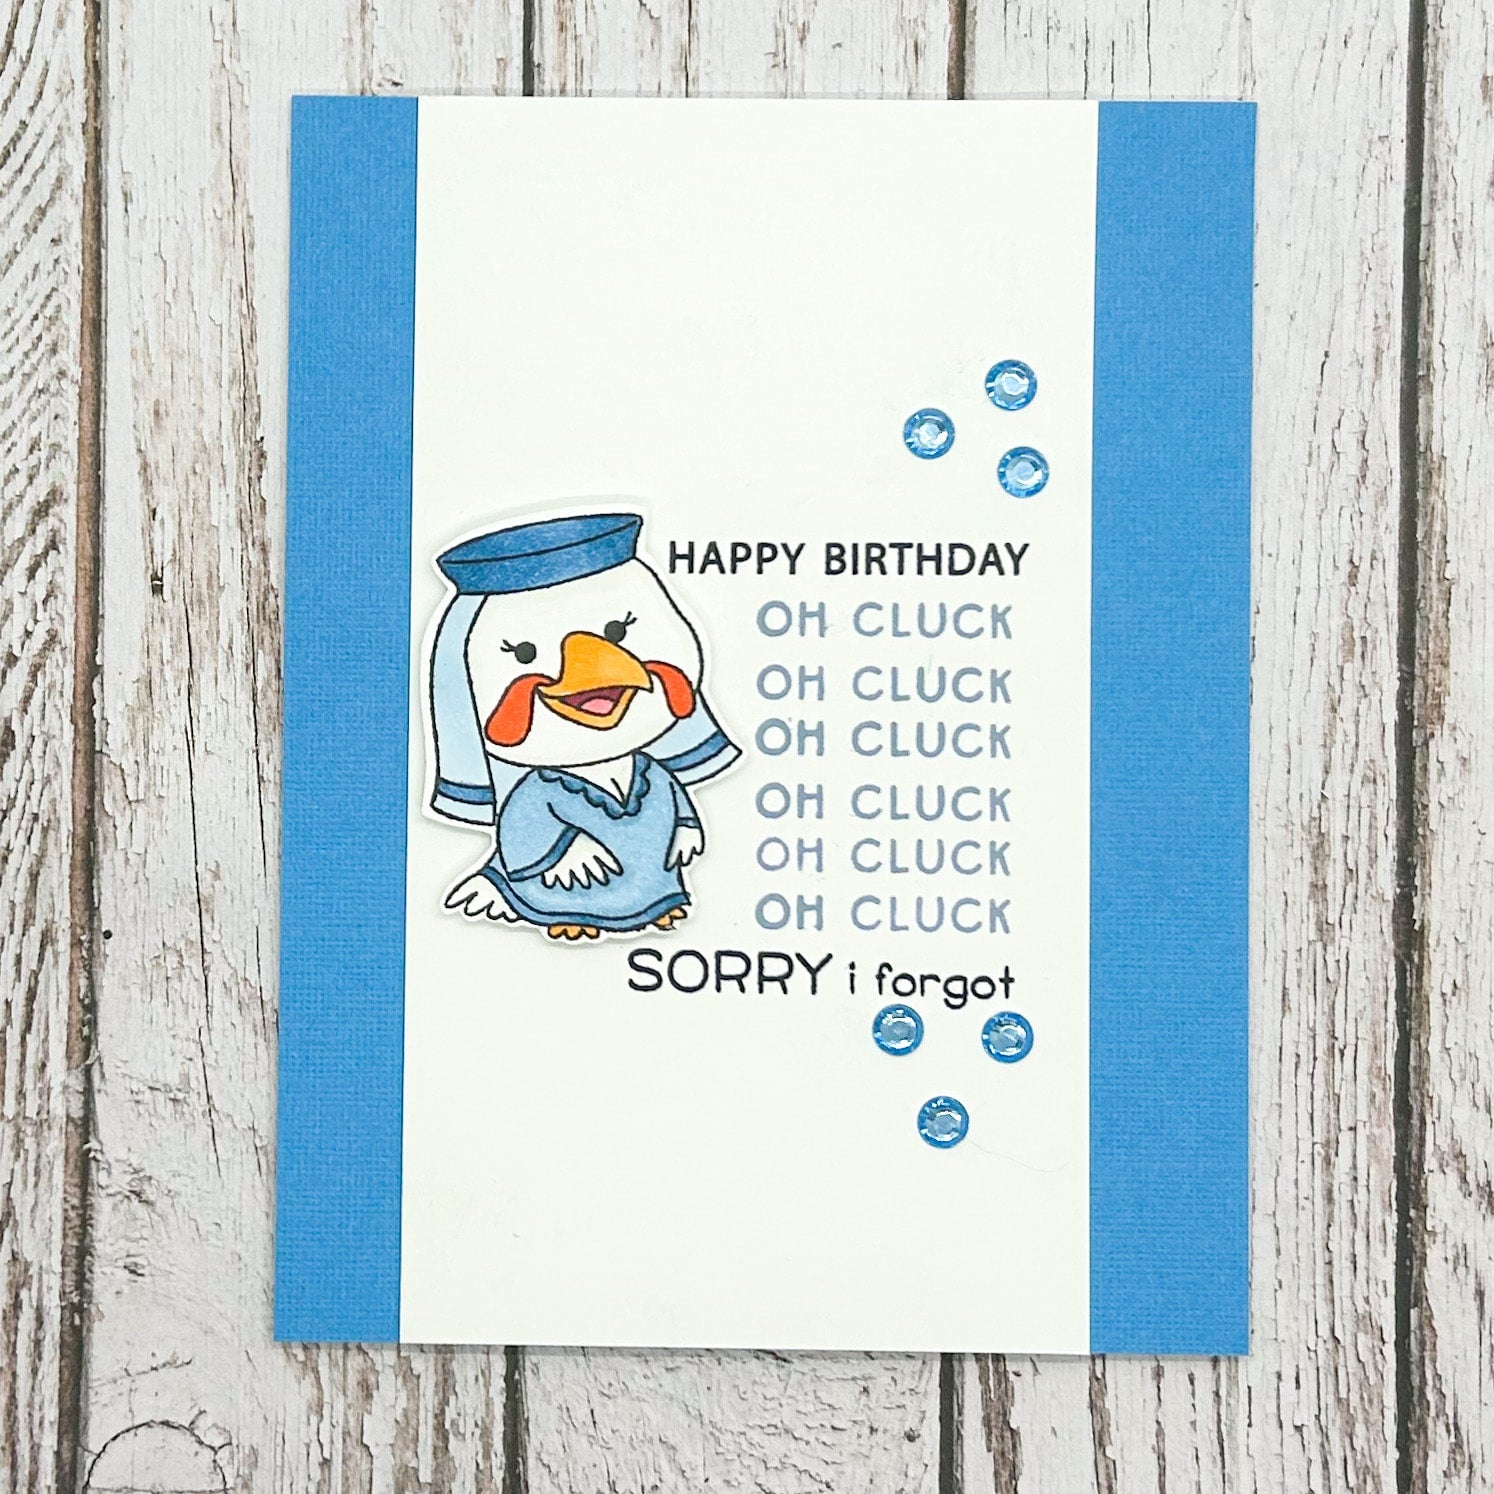 Oh Cluck Character Themed Handmade Belated Birthday Card